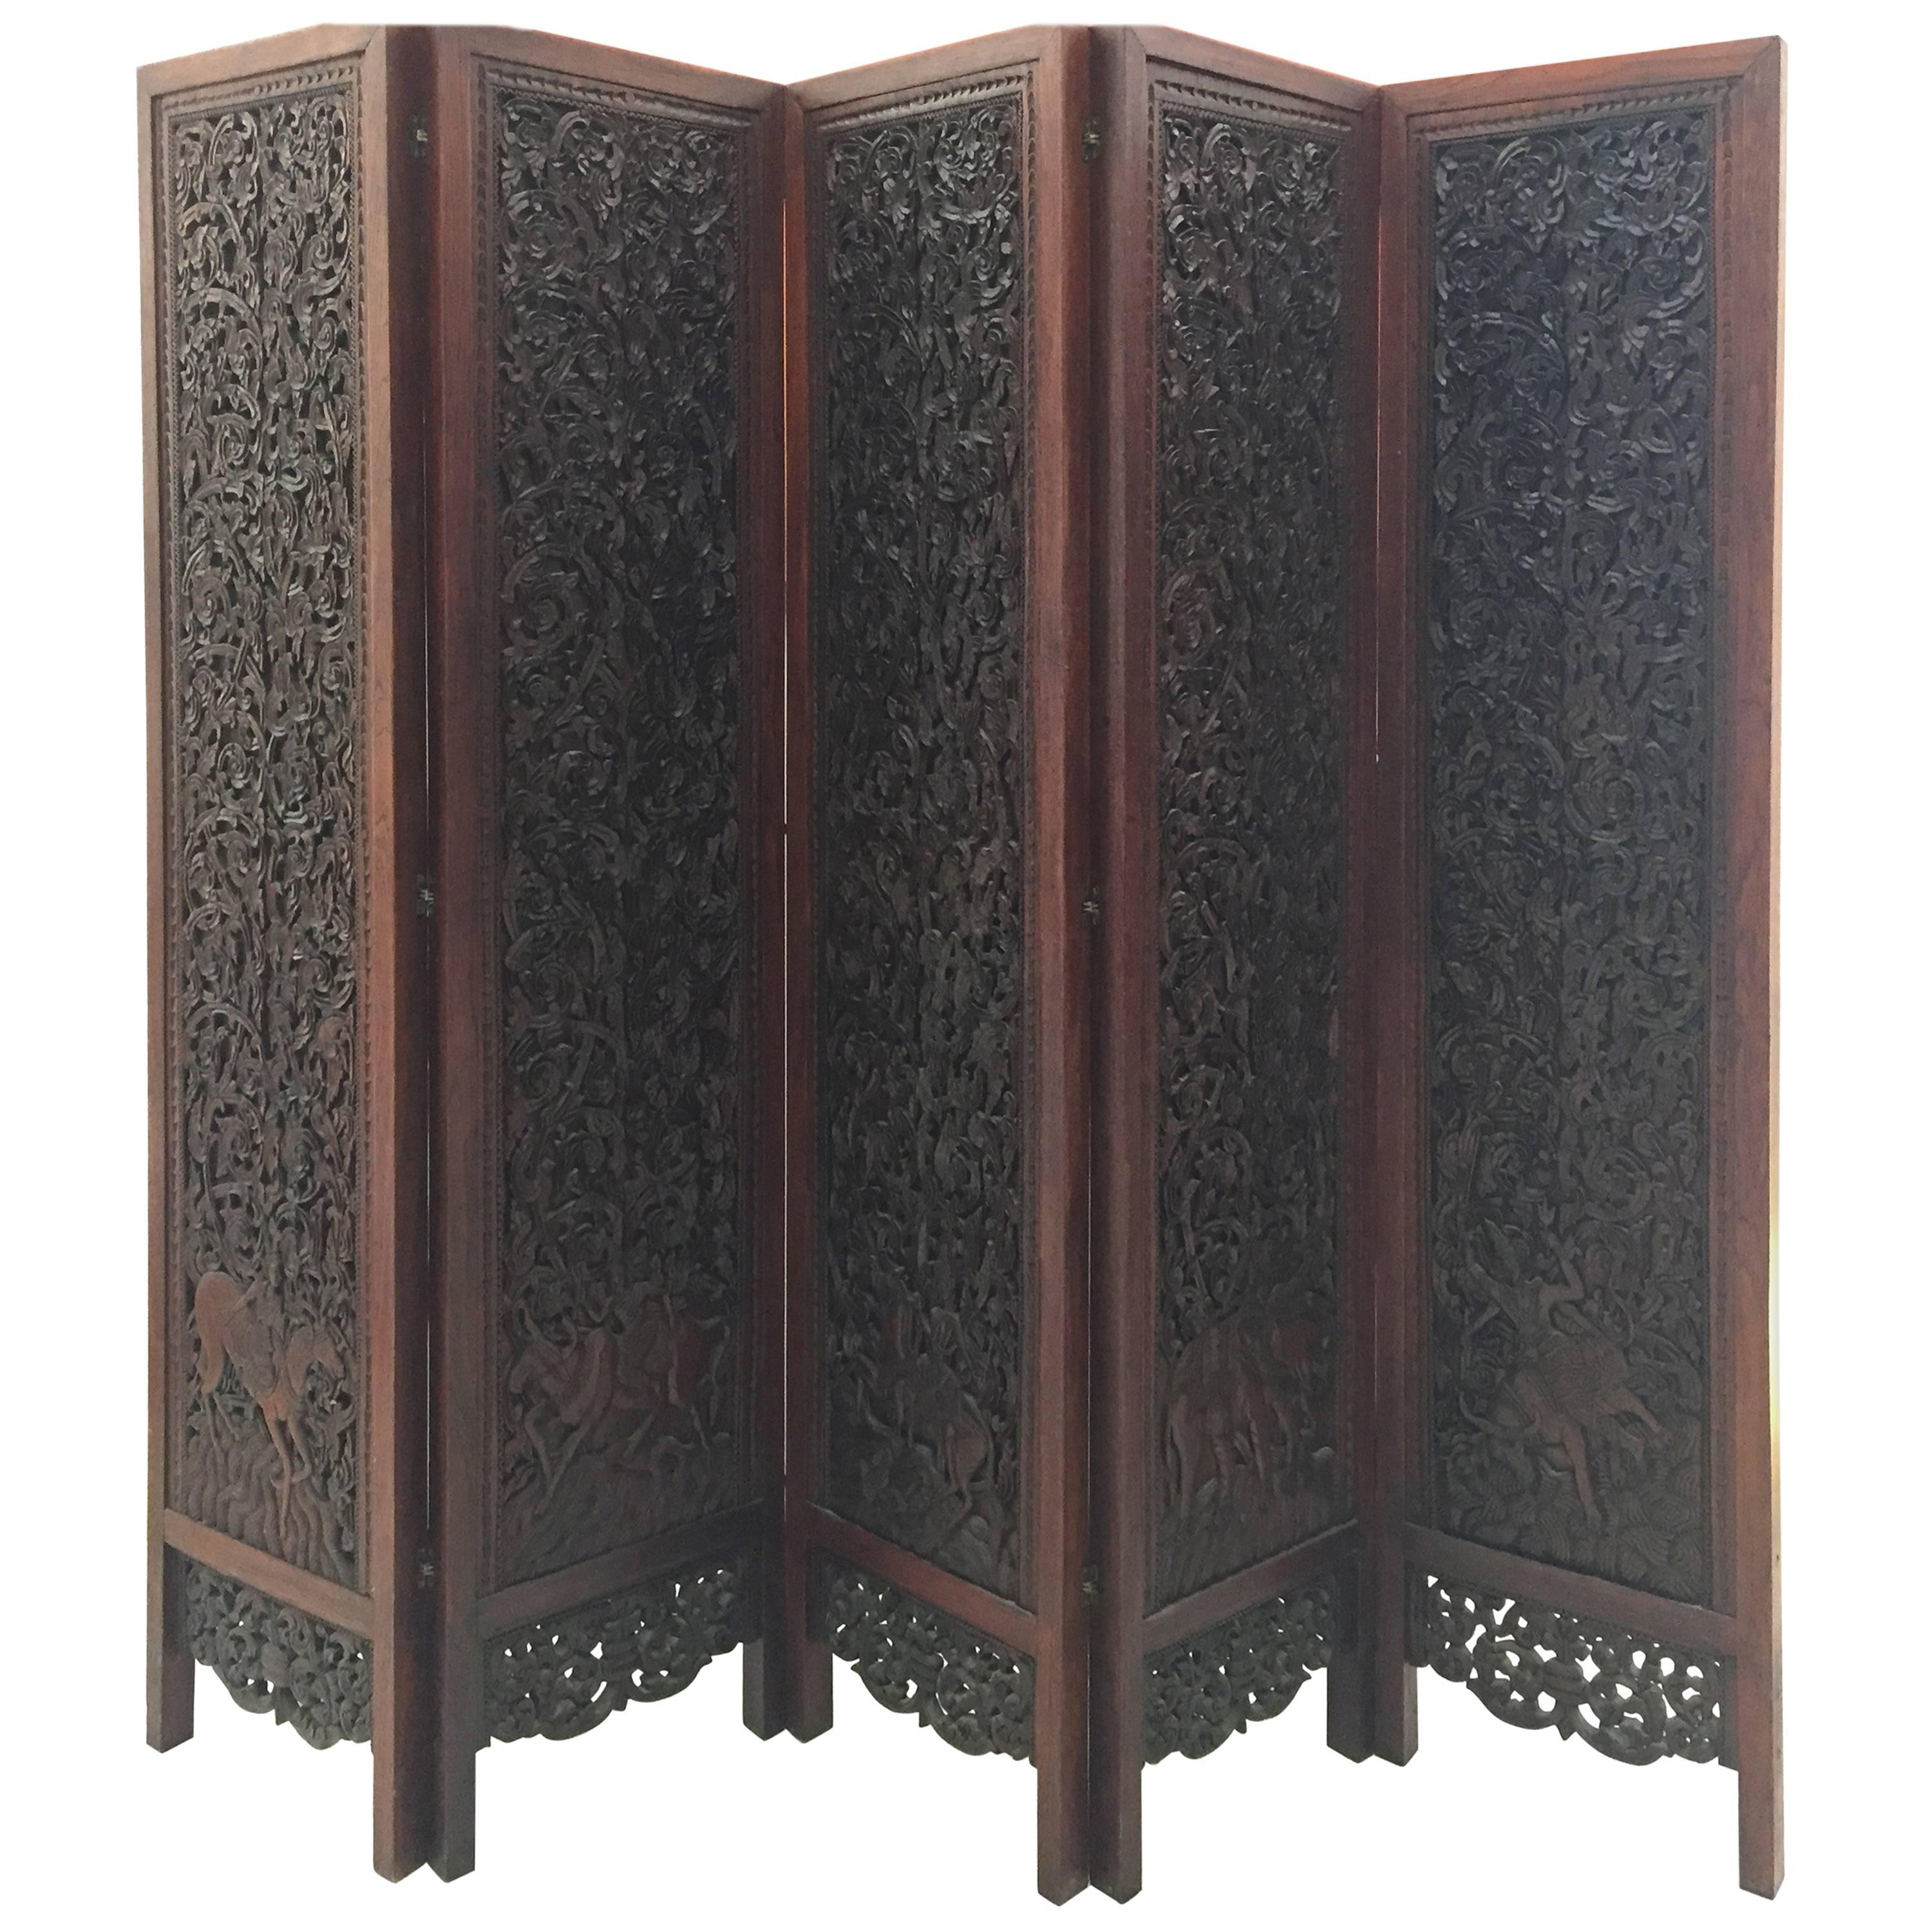 Asian Hand-Carved Wood Five Panels Double-Sided Folding Screen Room Divider